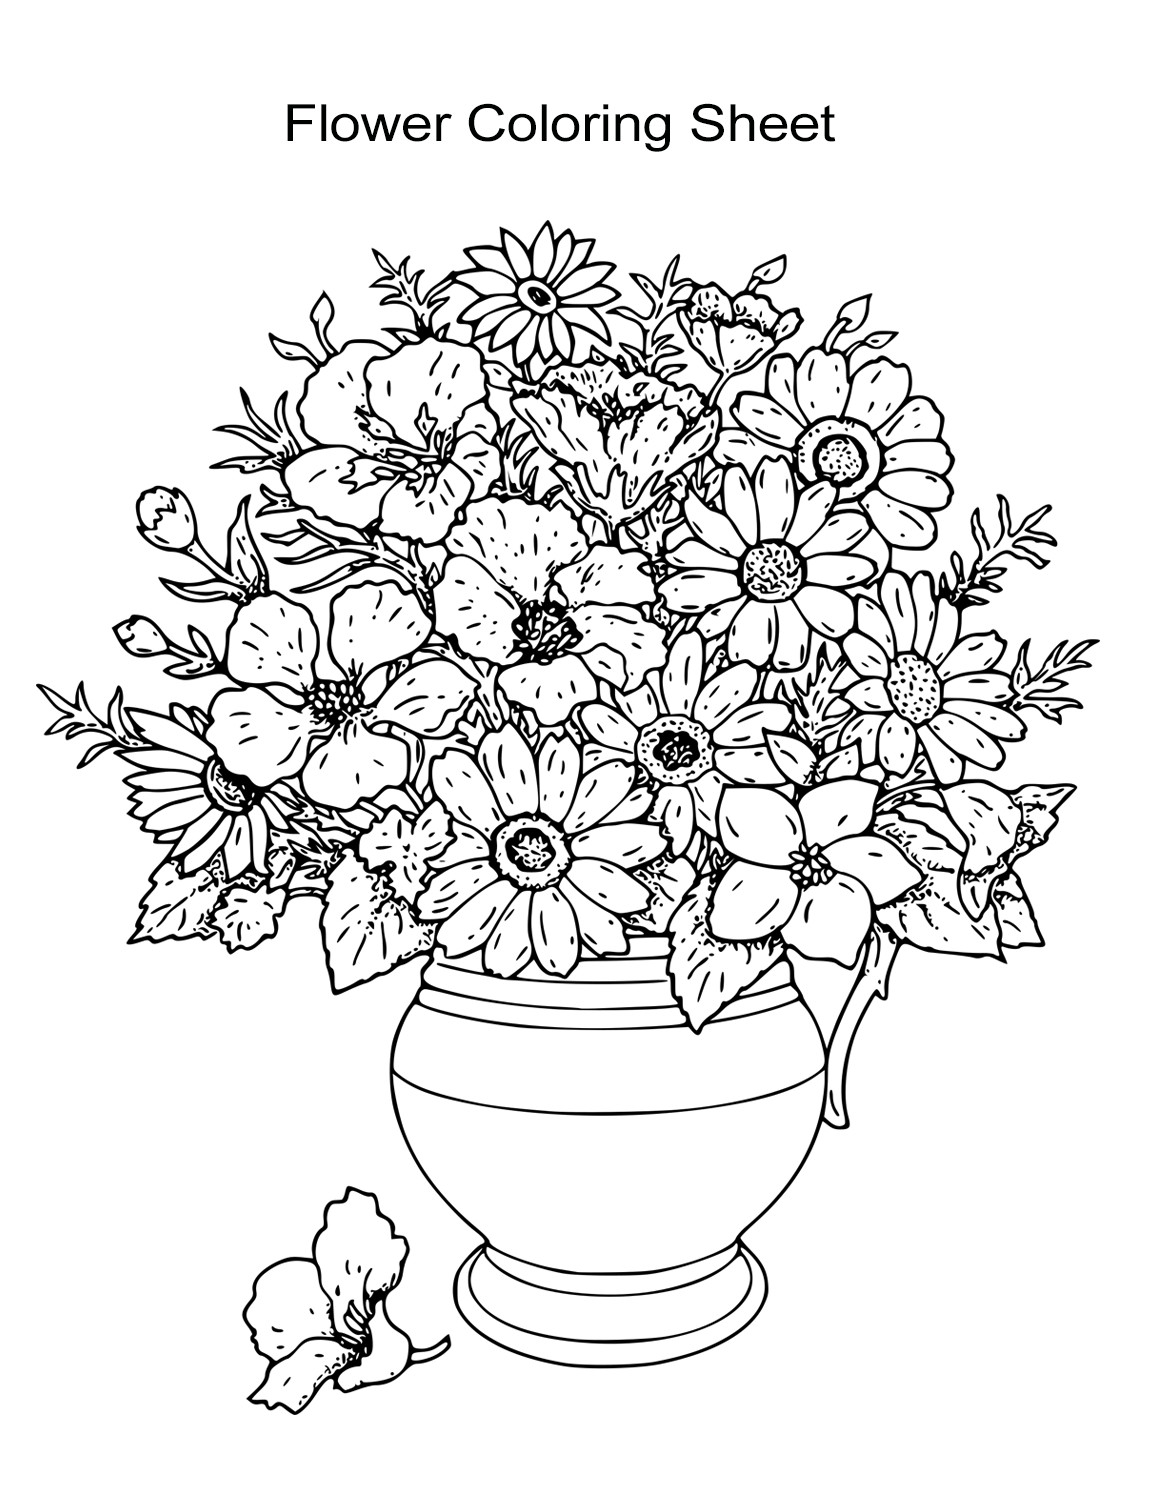 Coloring Pages For Girls Flowers
 10 Flower Coloring Sheets for Girls and Boys Free